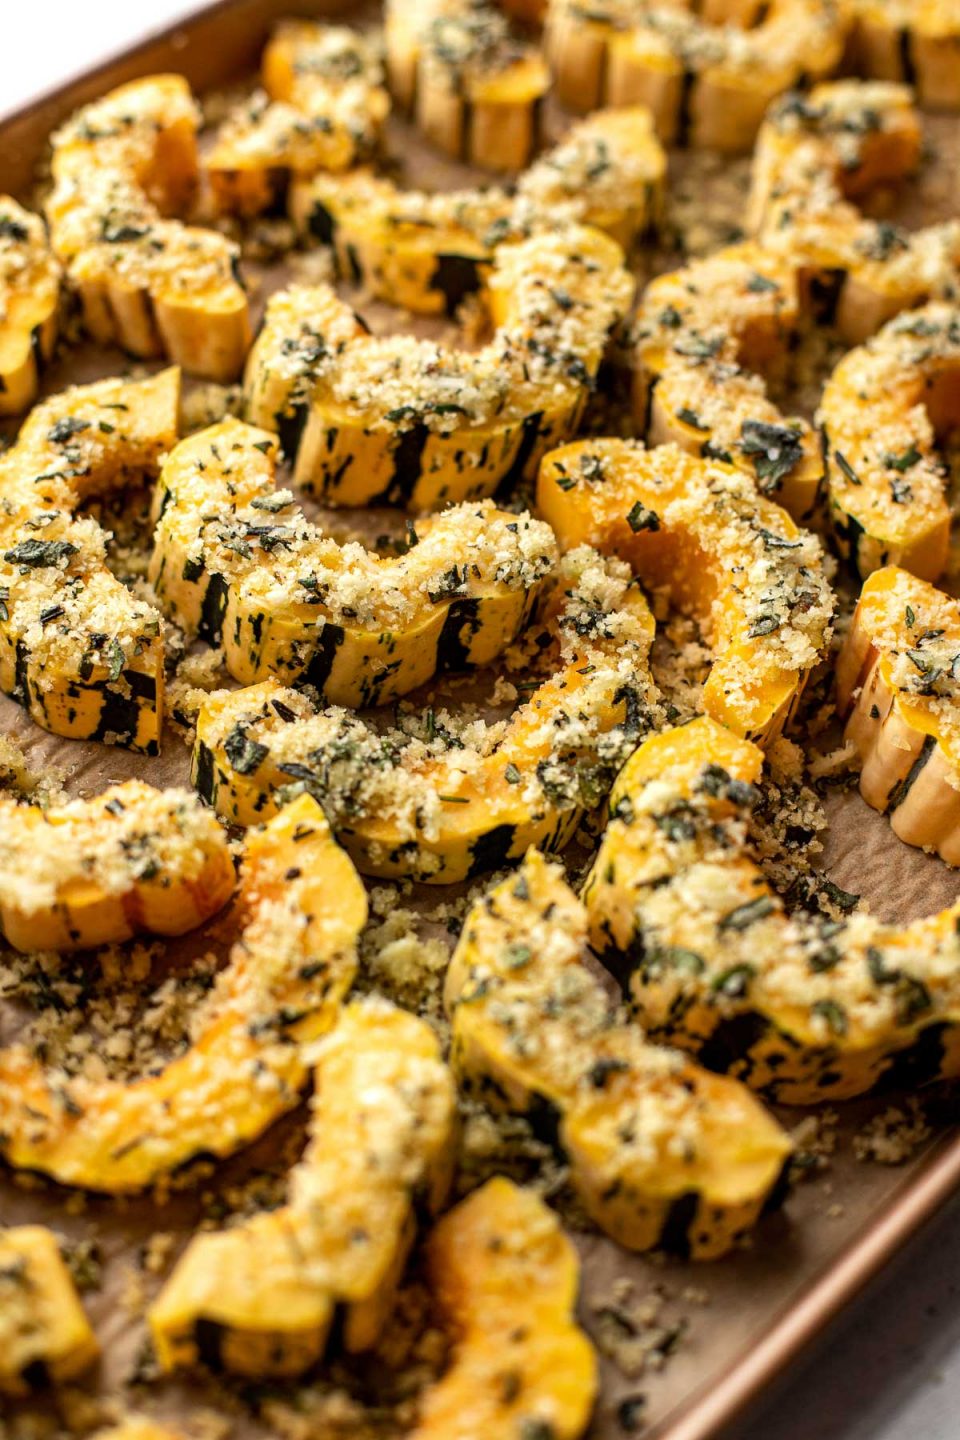 Slices of Delicata Squash seasoned with parmesan cheese, panko breadcrumbs, and fresh herbs are arranged on a baking sheet lined with brown parchment paper for roasting.